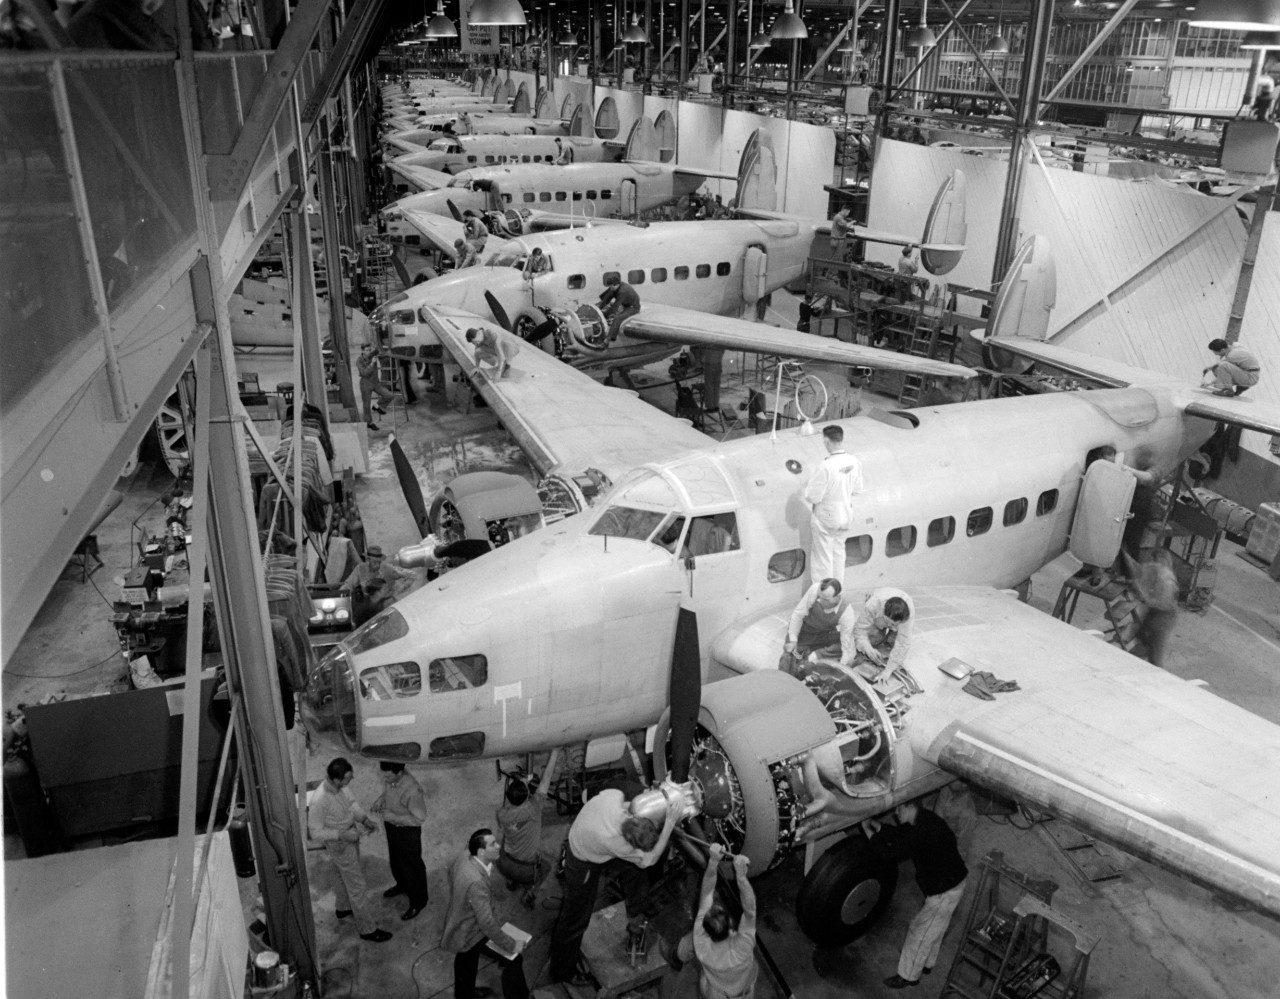 This assembly line is producing the Hudson Bombers used in World War II.